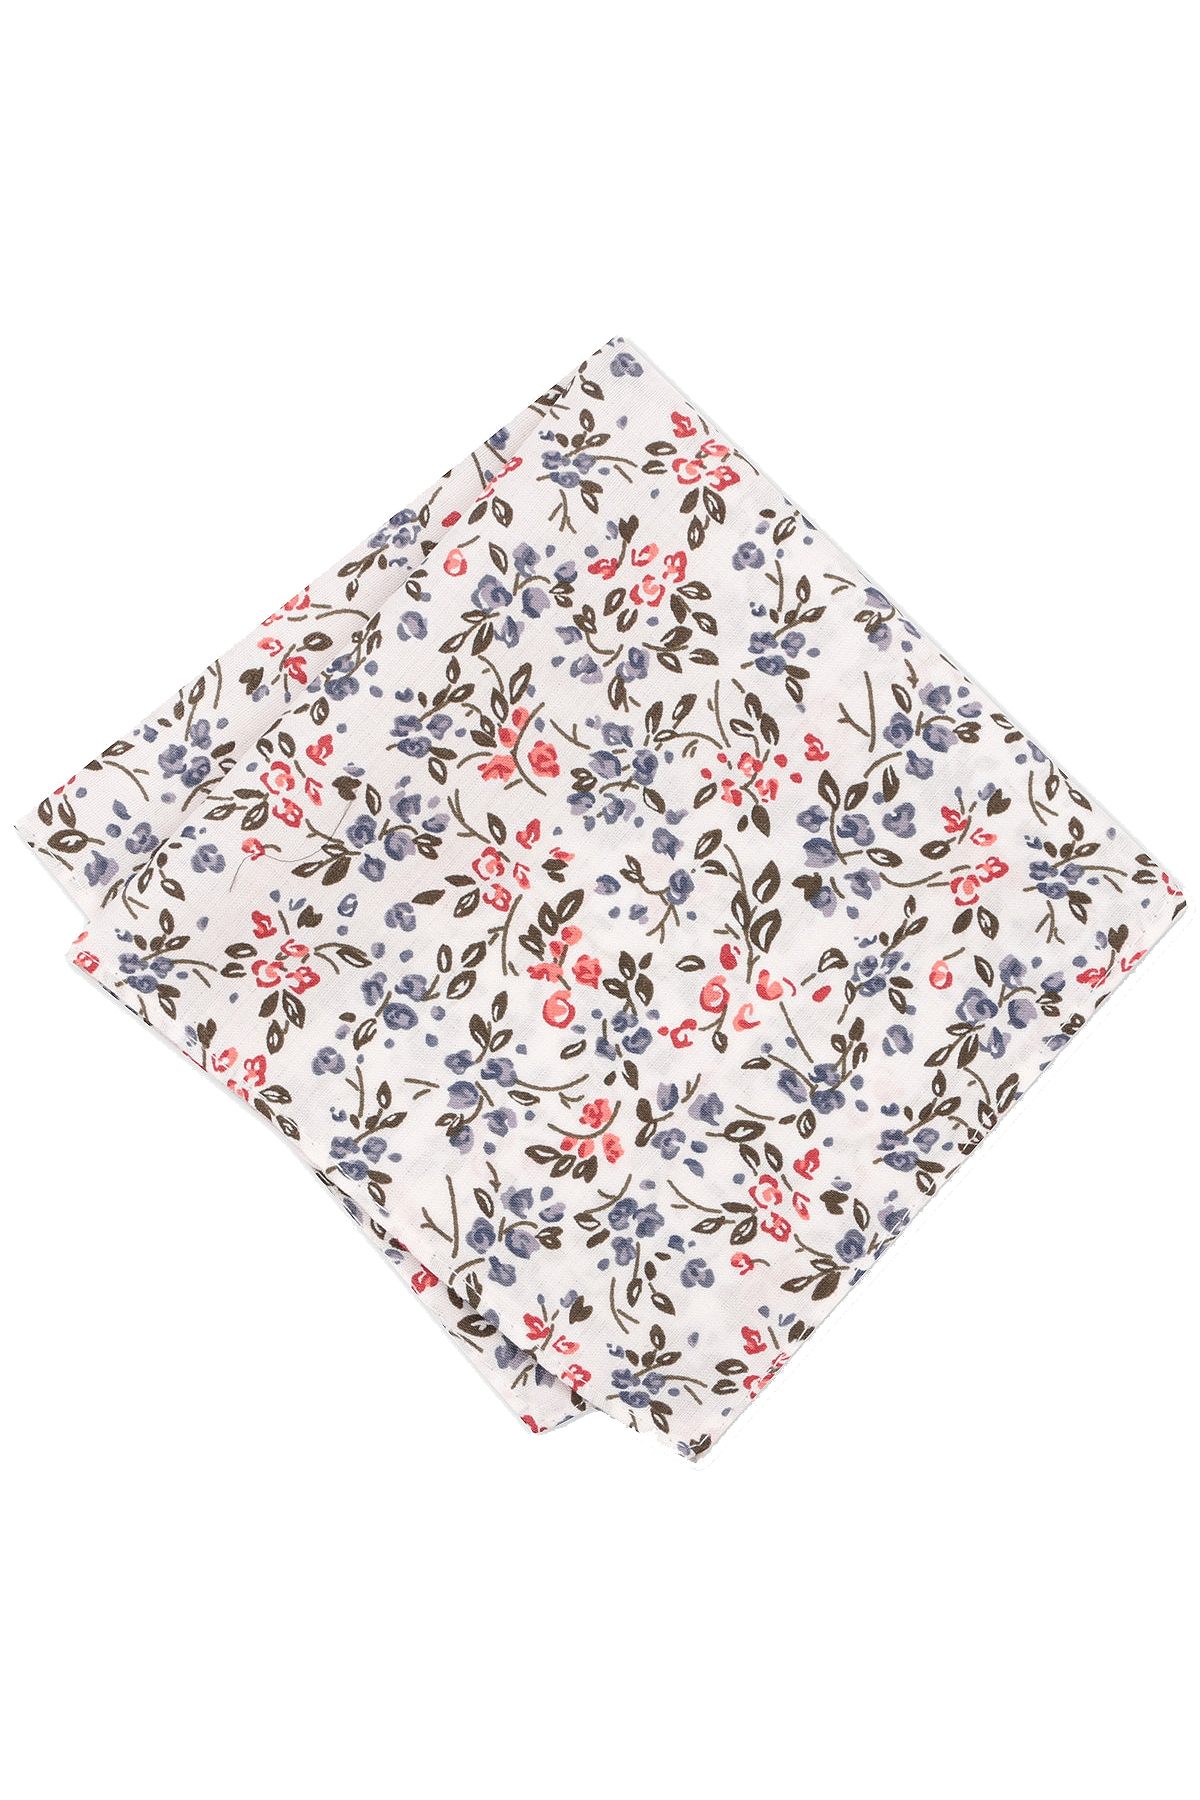 BAR III White Cook-Floral Printed Cotton Pocket Square